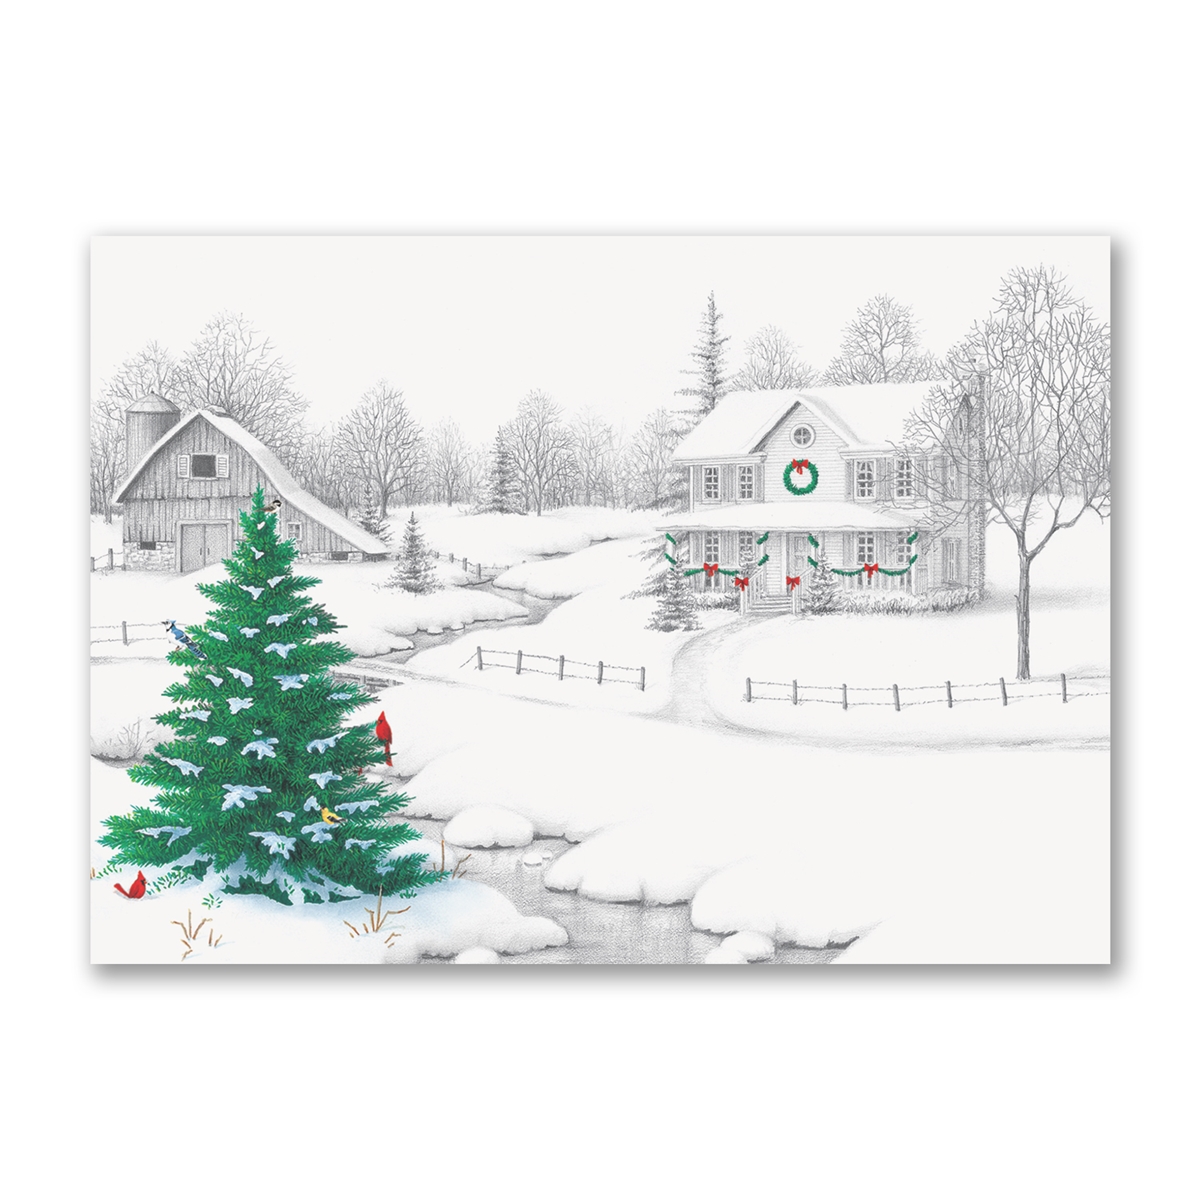 Home for the Holidays Cards